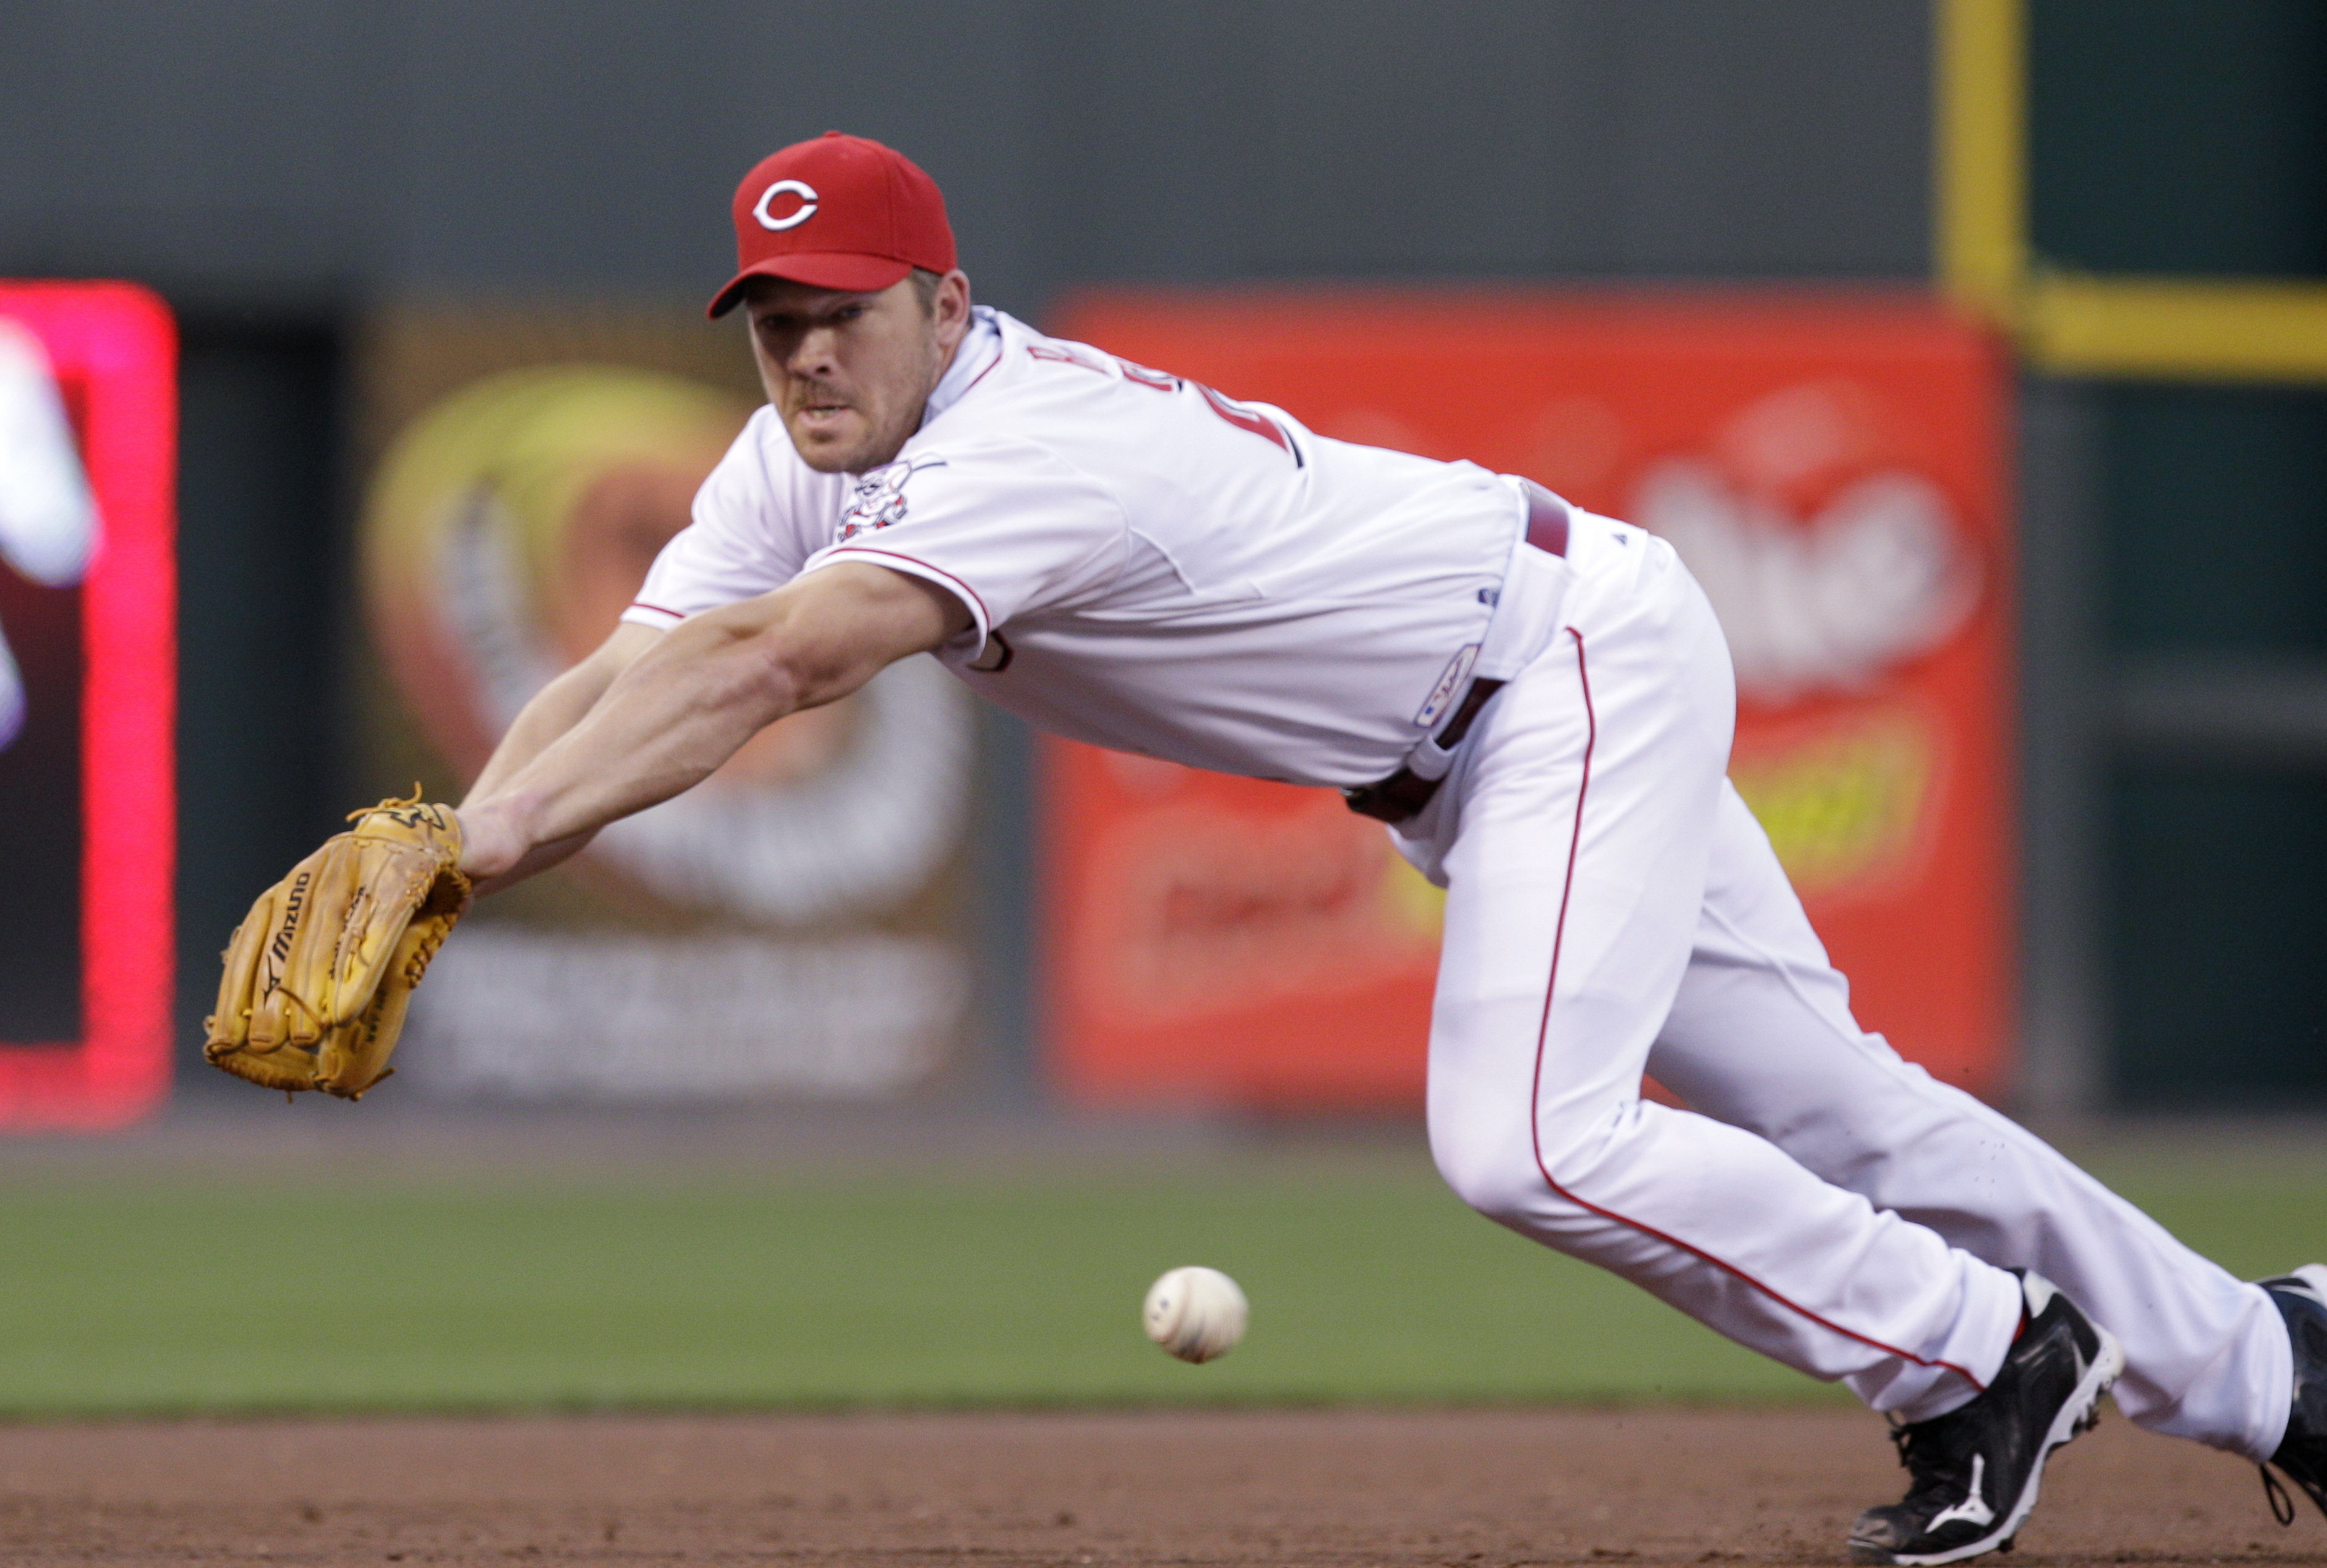 Scott Rolen could become just 18th third baseman in Hall of Fame